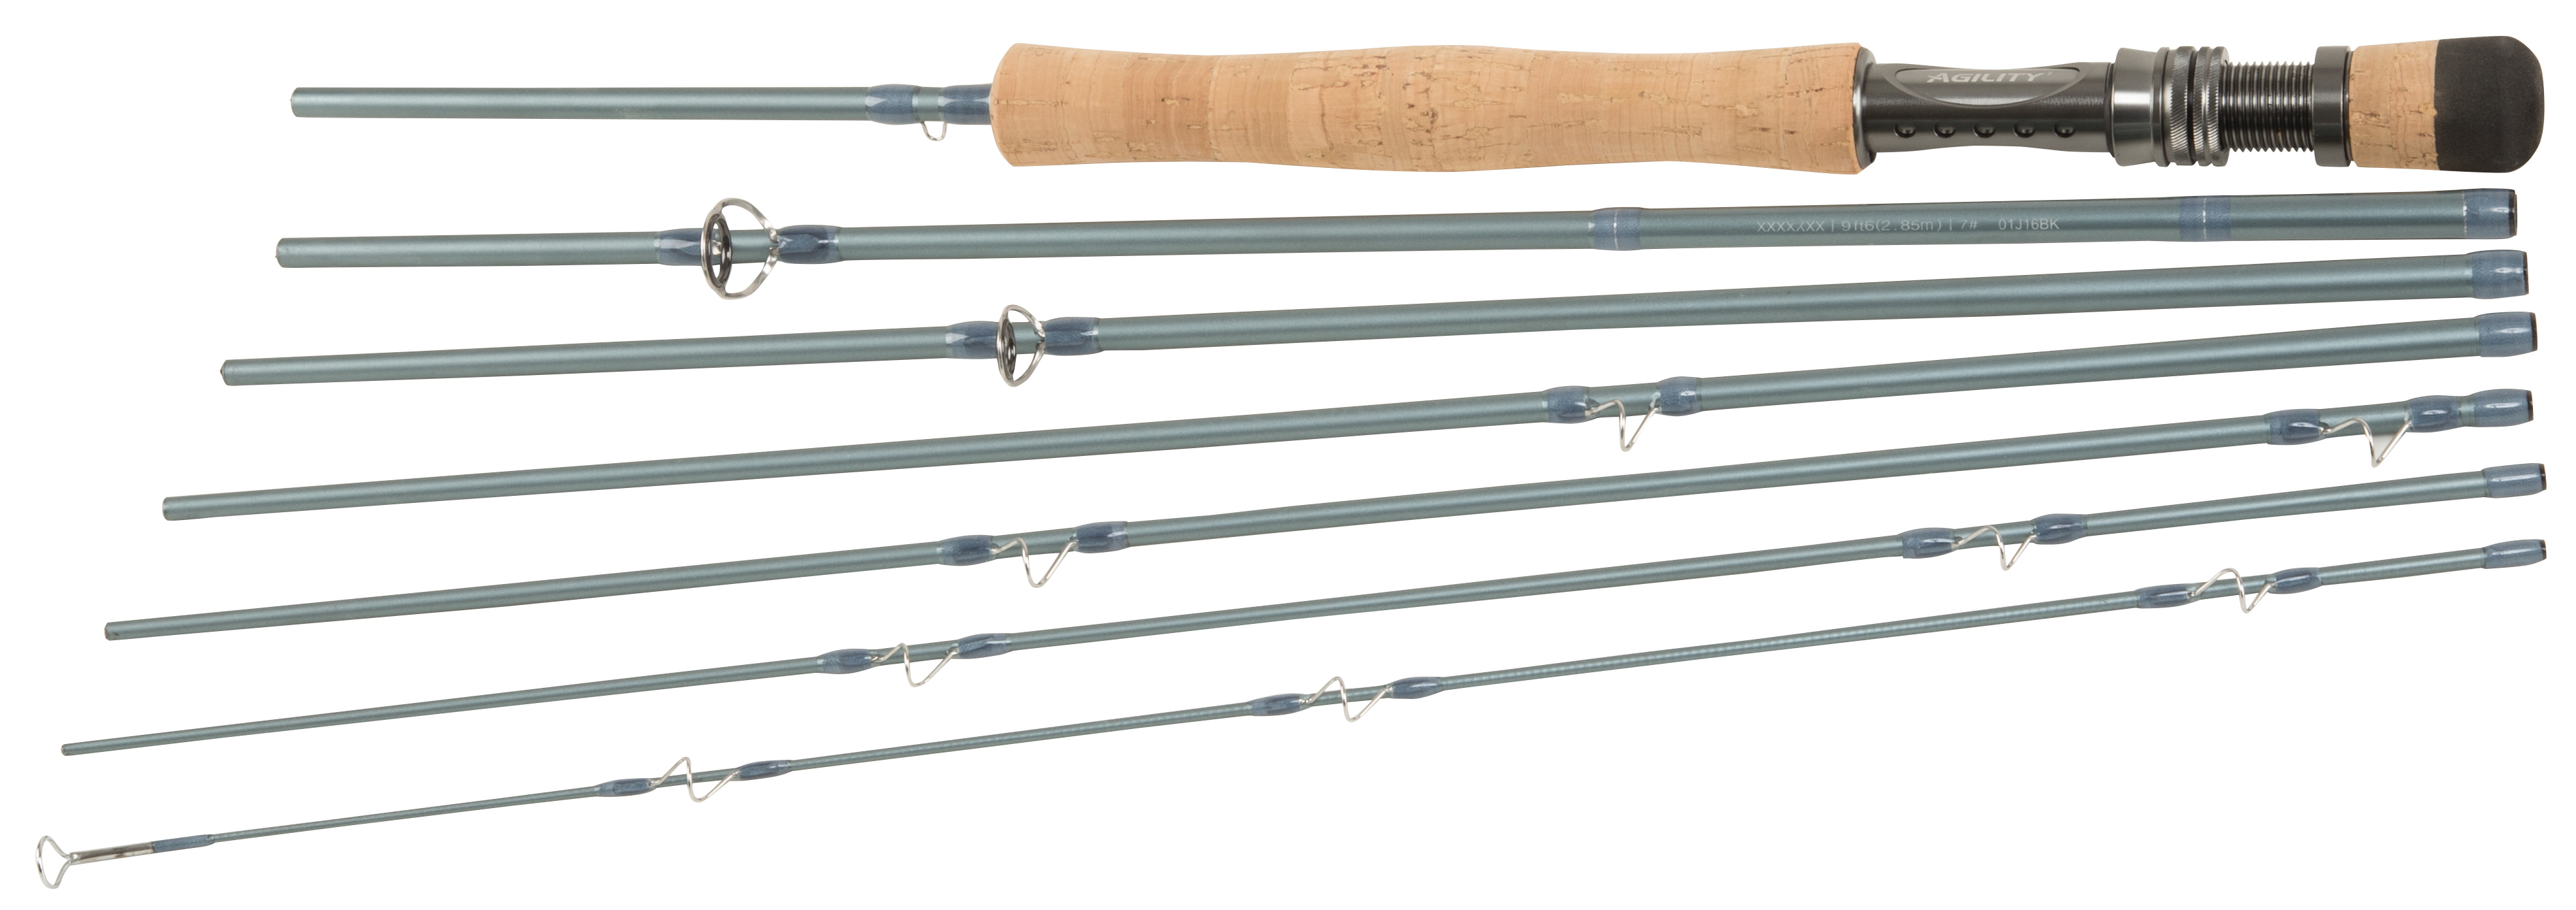 11FT WITH HARD TRAVEL TUBE SHAKESPEARE AGILITY 2-4 PIECE FLY RODS 8.6FT 